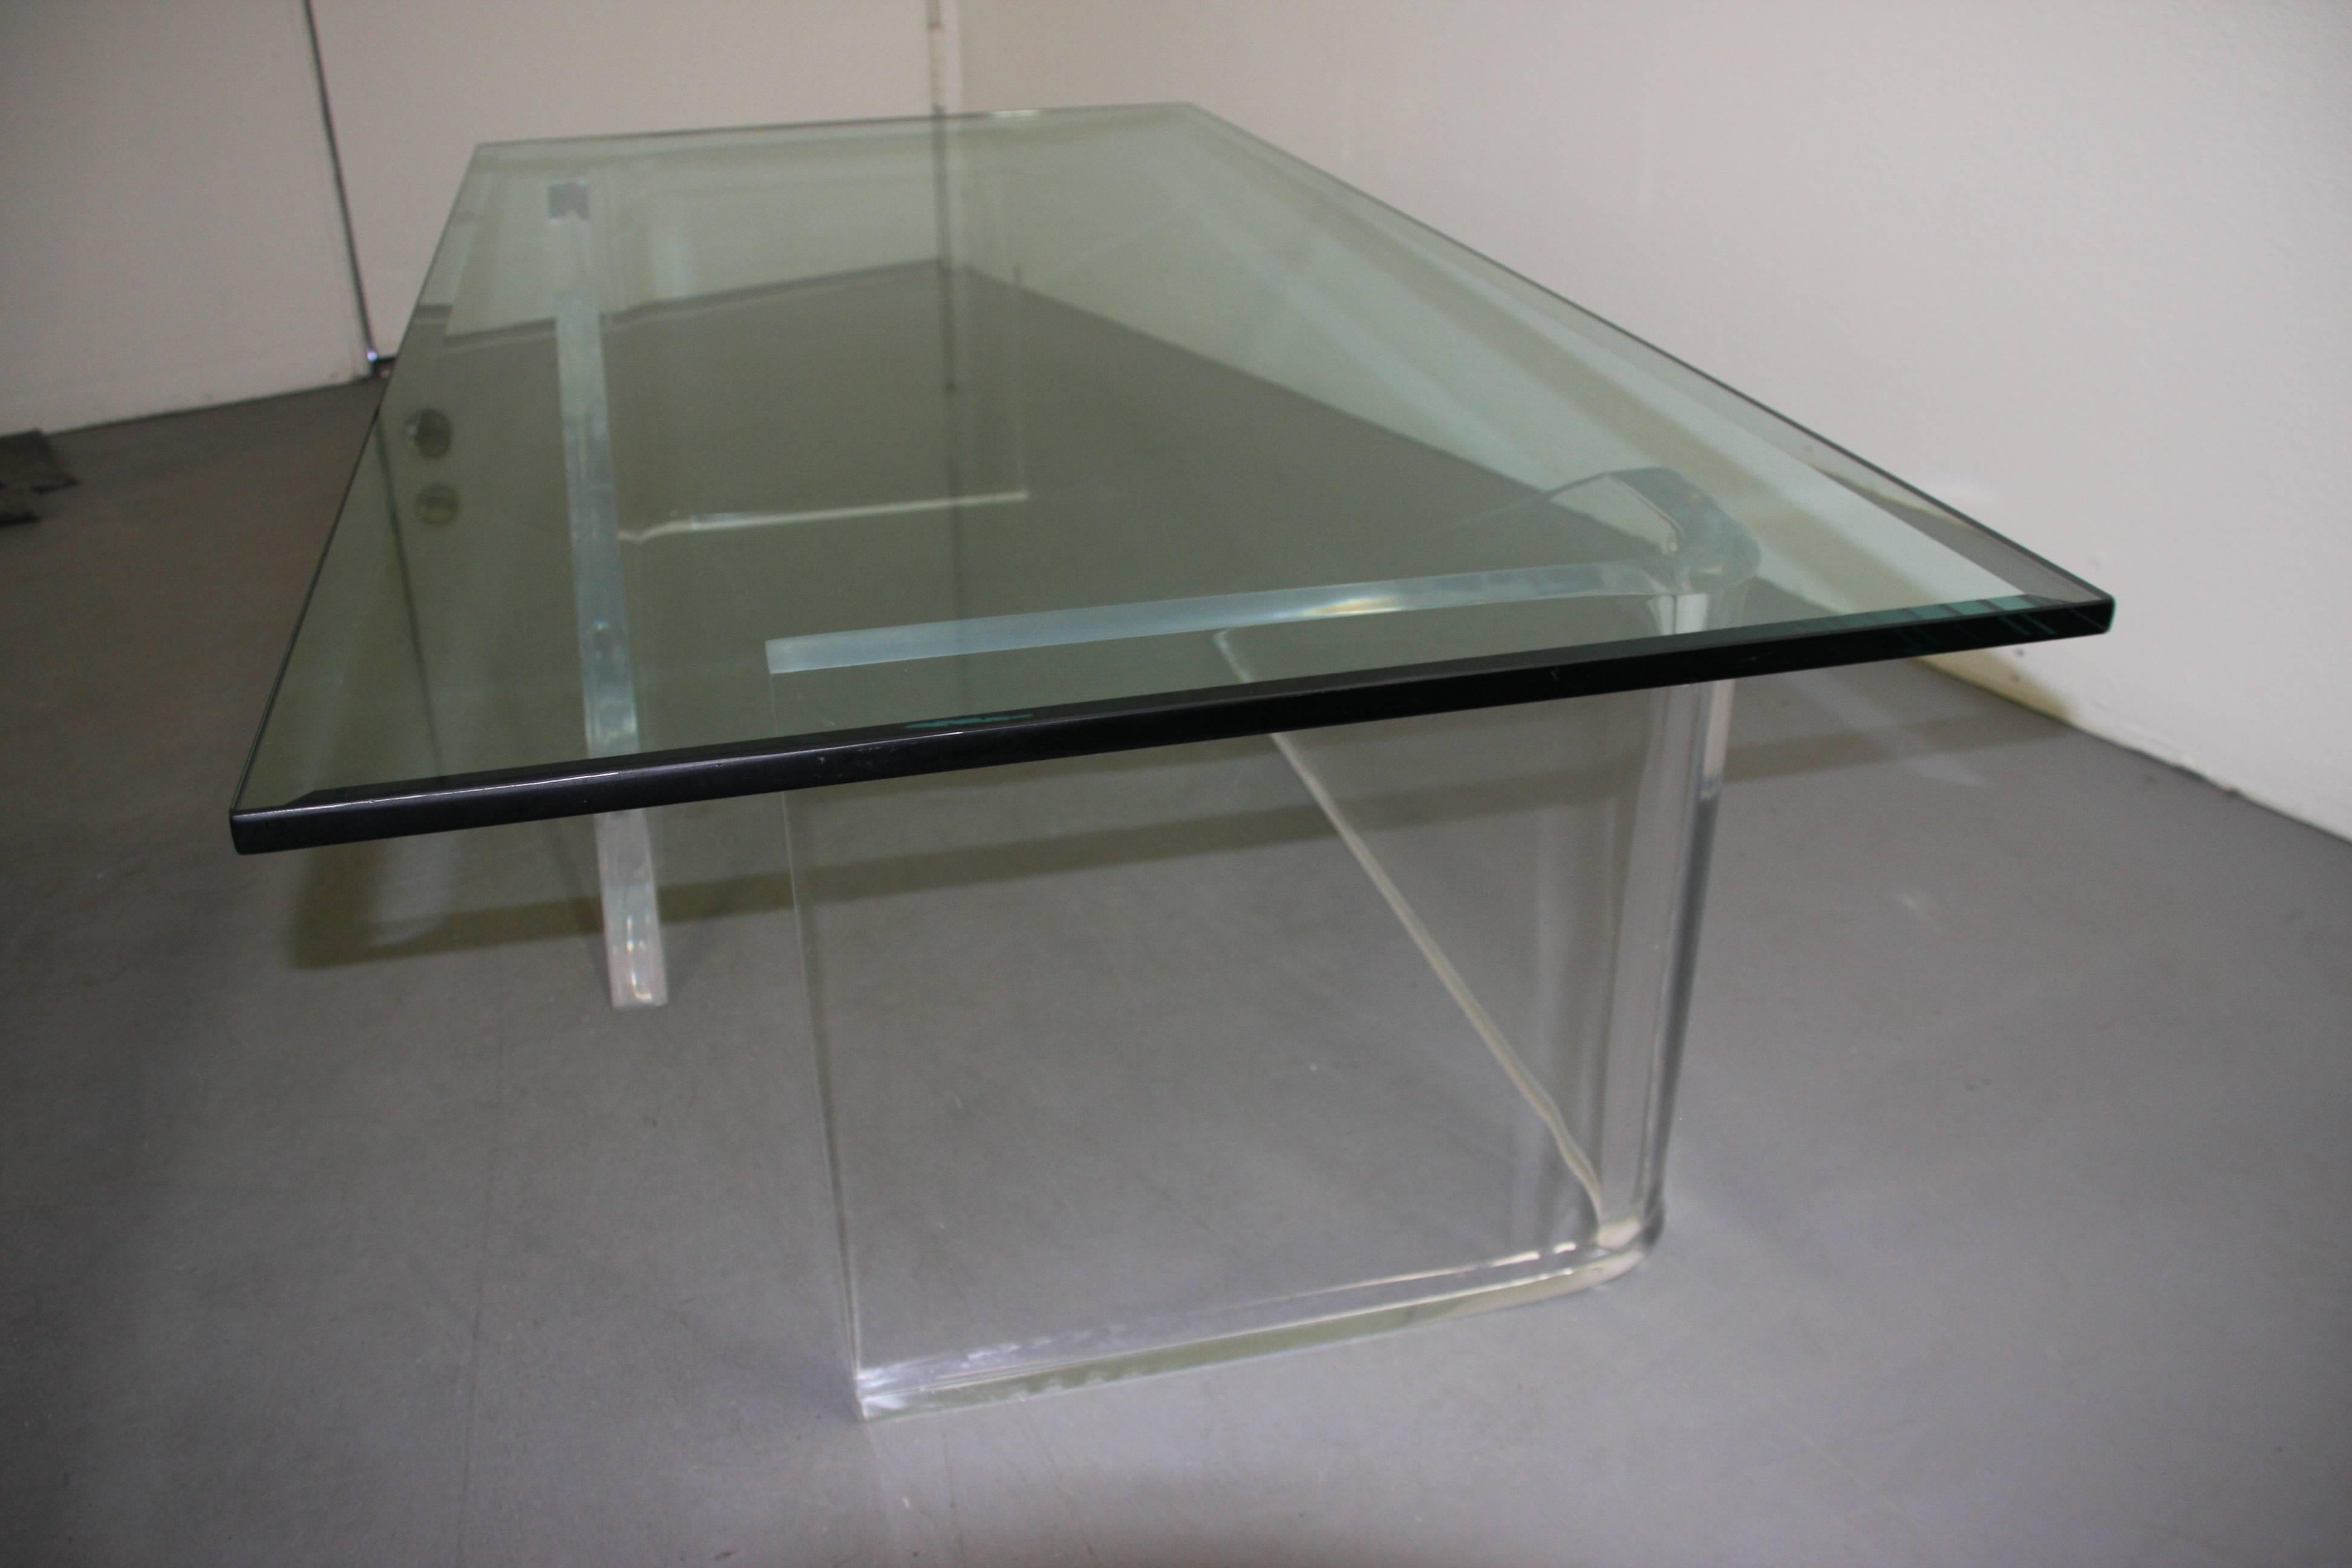 An interesting and unusual coffee table with a lucite base and nice glass top.
